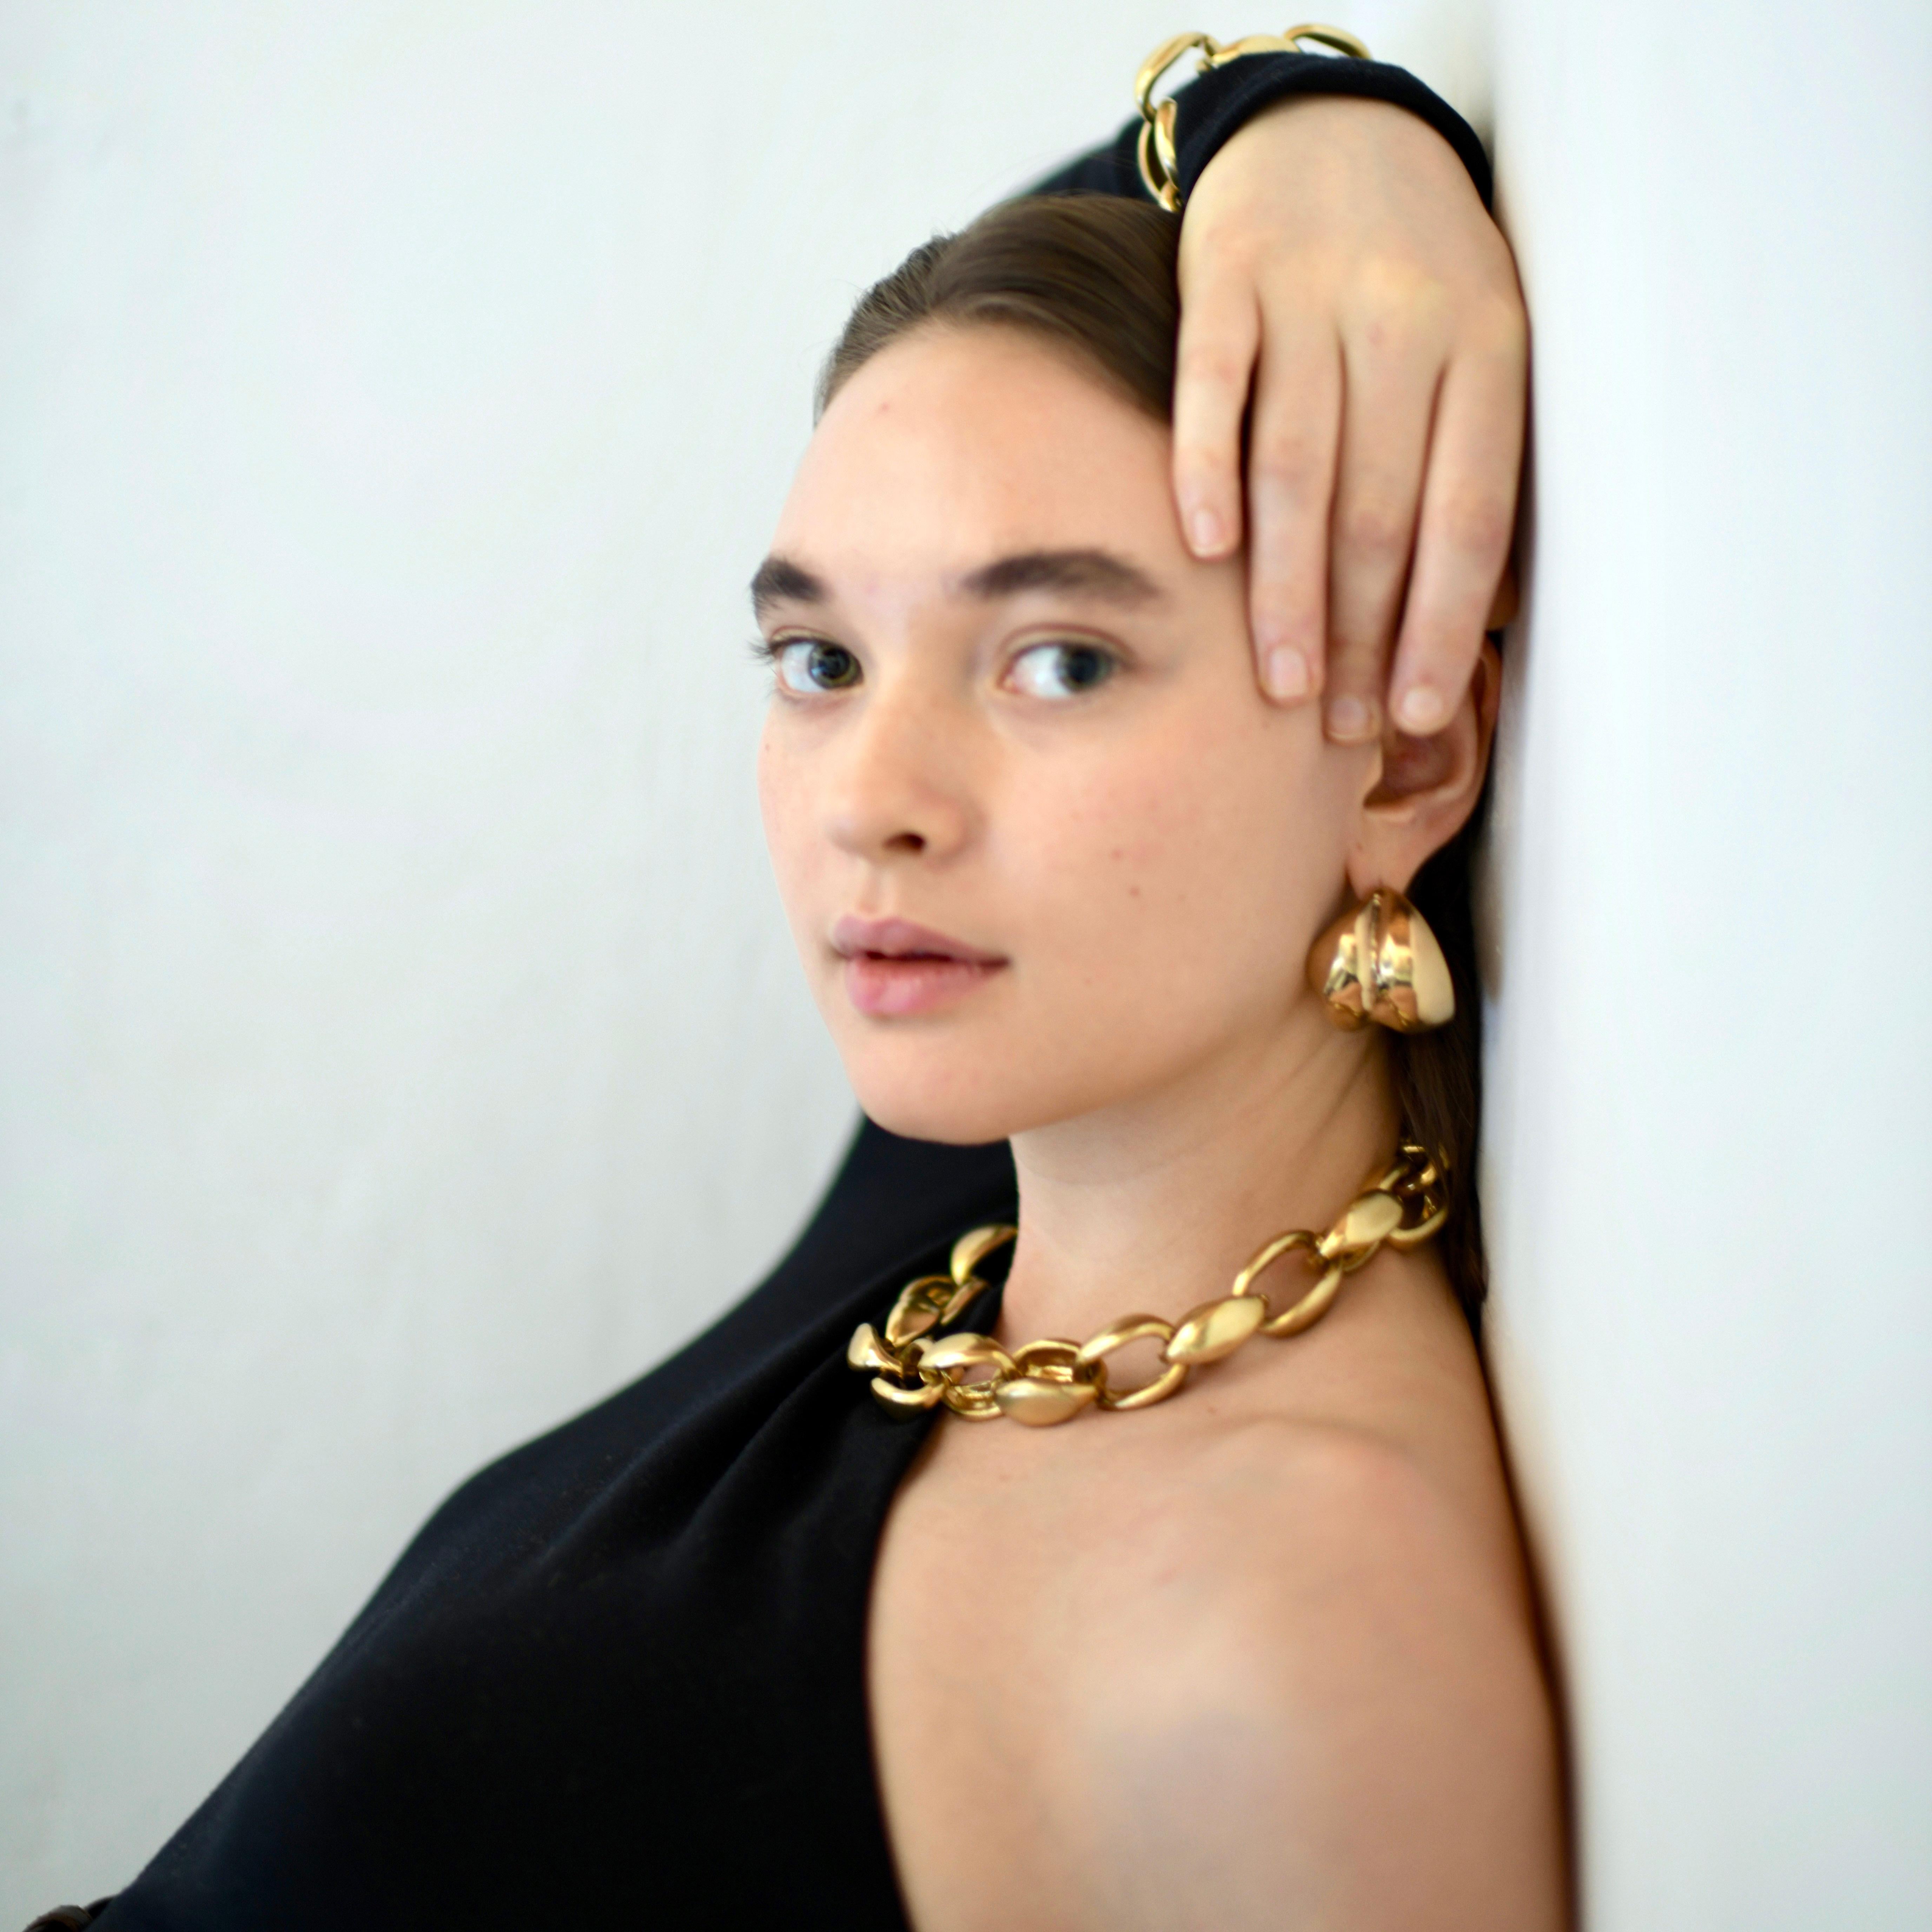 The Ariana Boussard-Reifel Apnet chain necklace is a  chunky, heritage-inspired chain, reminiscent of equestrian style. This necklace evokes a sense of glamour and gravitas that is equally at home in a horse stable or hip-hop video. The substantial